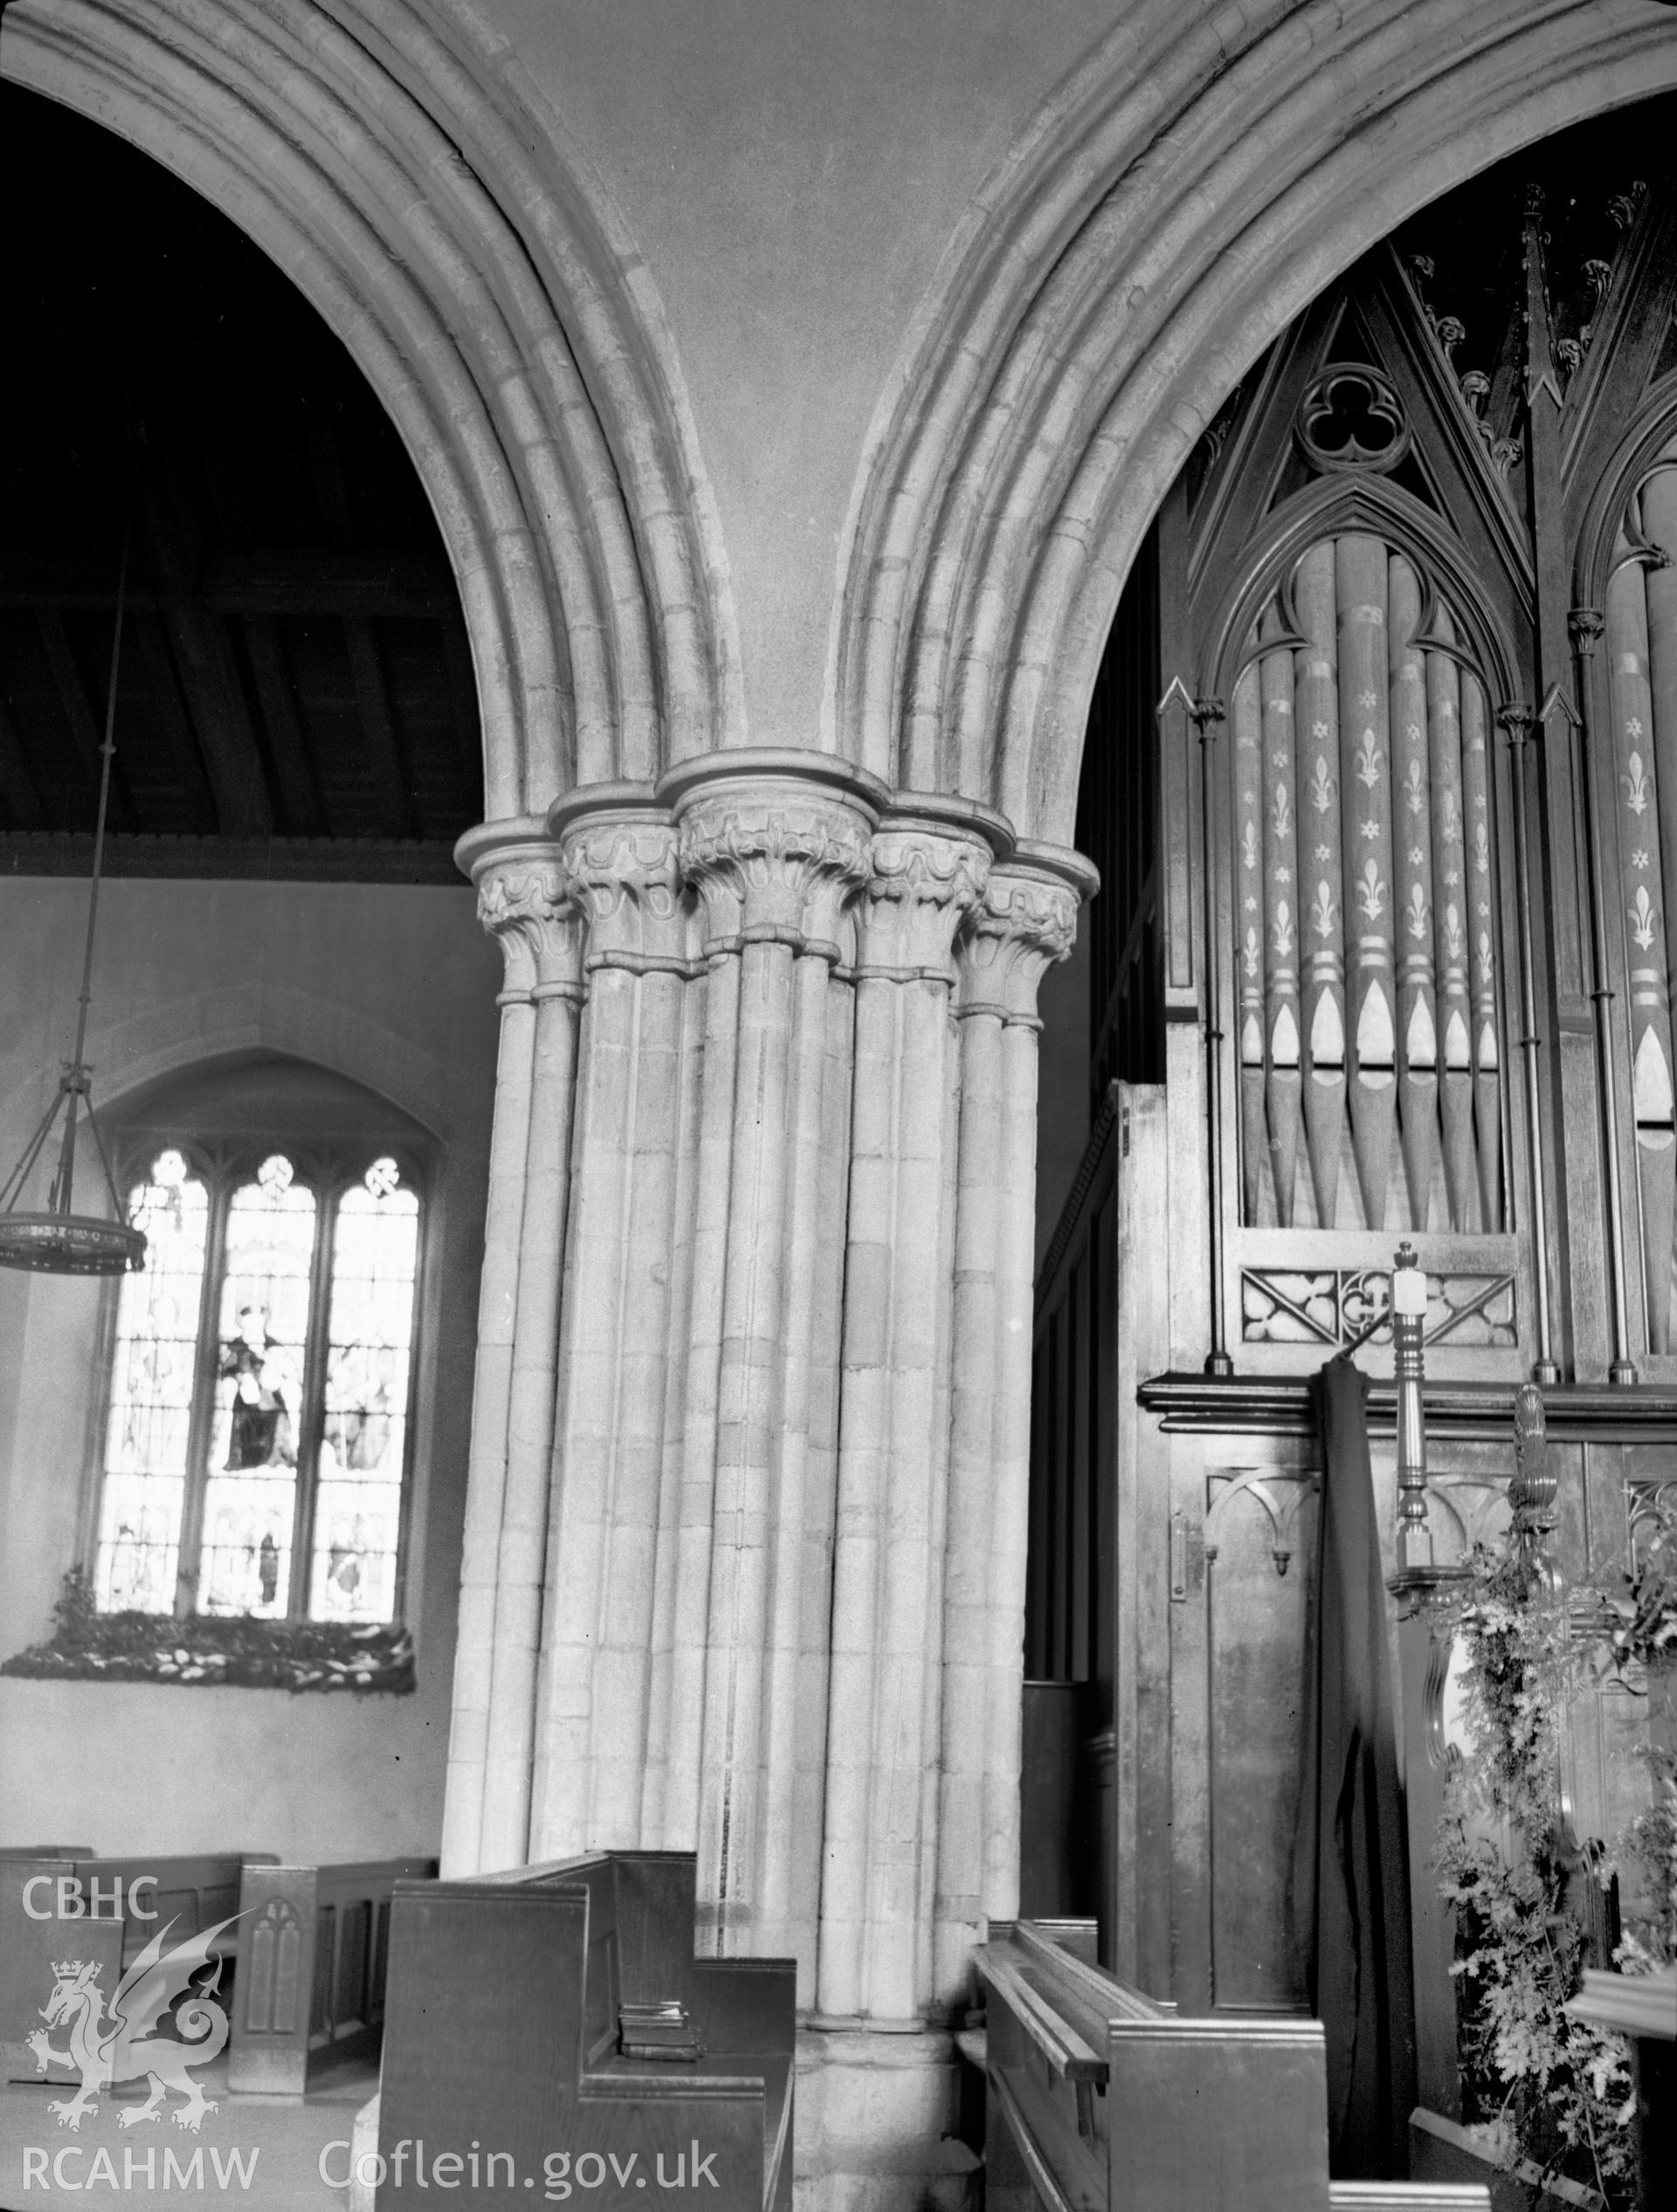 Digital copy of a nitrate negative showing interior view of arcade pillar, St Idloes' Church, Llanidloes. From the National Building Record Postcard Collection.